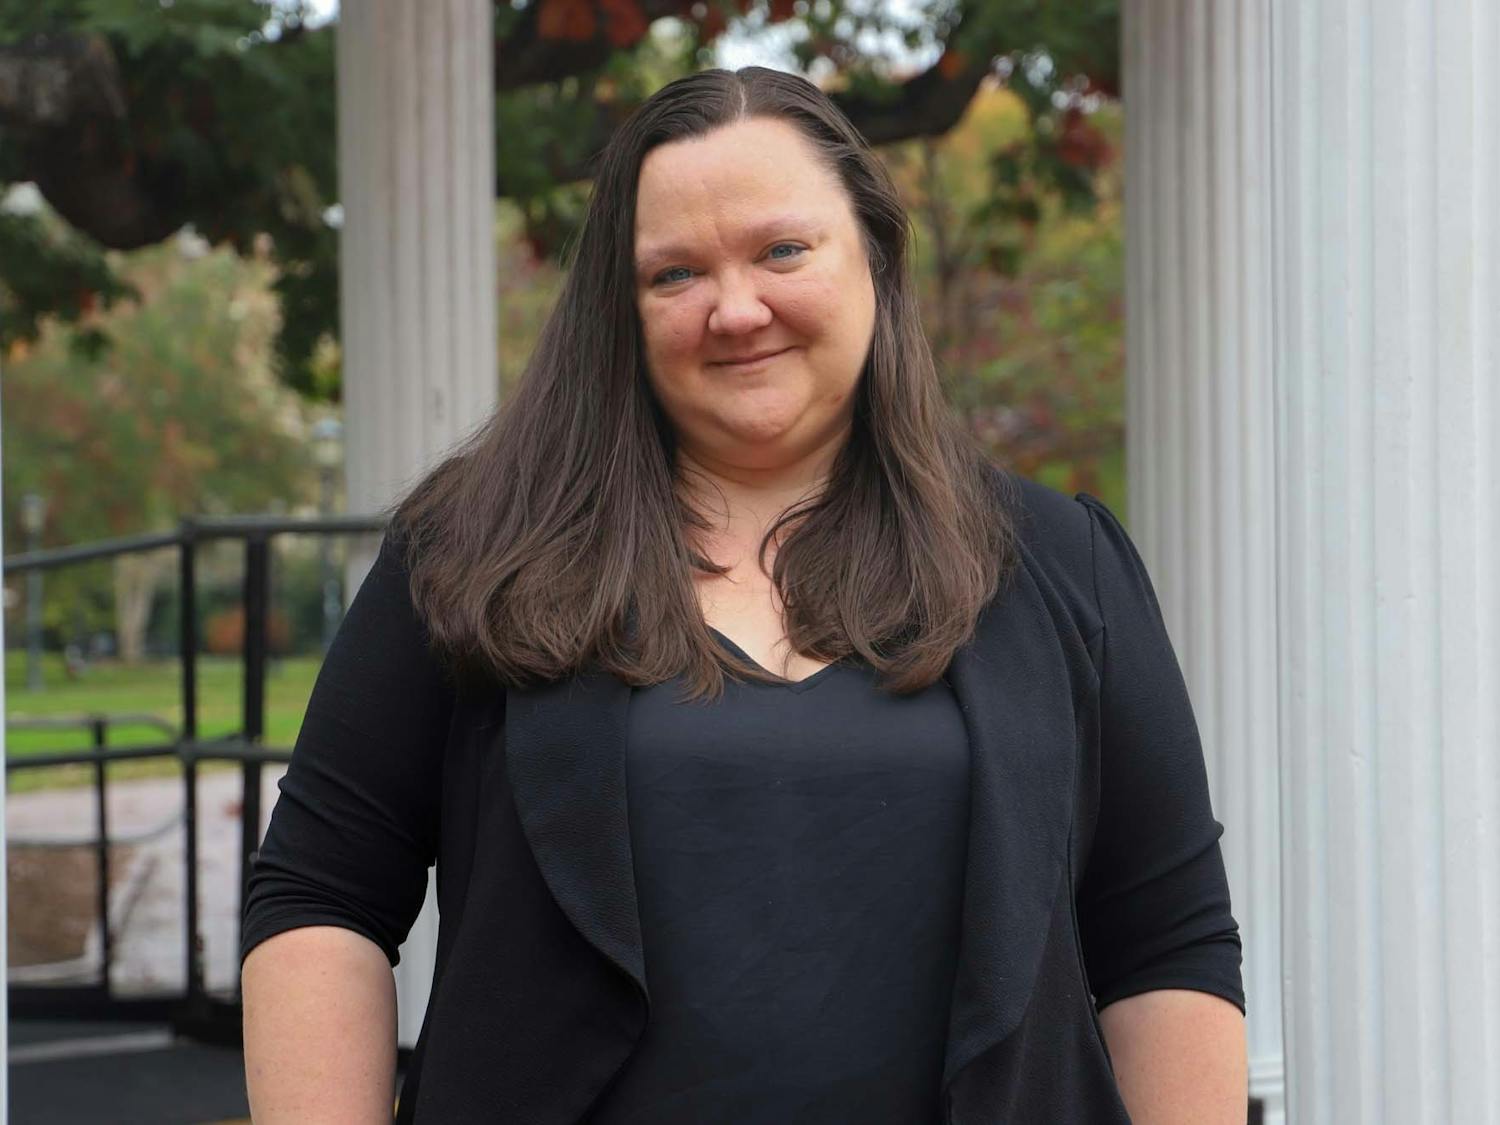 UNC Professor, Dr. Rebecca Kreitzer, poses by the Old Well on Wednesday, October 25, 2022. Dr. Kreitzer created a website designed to help students learn how to vote.